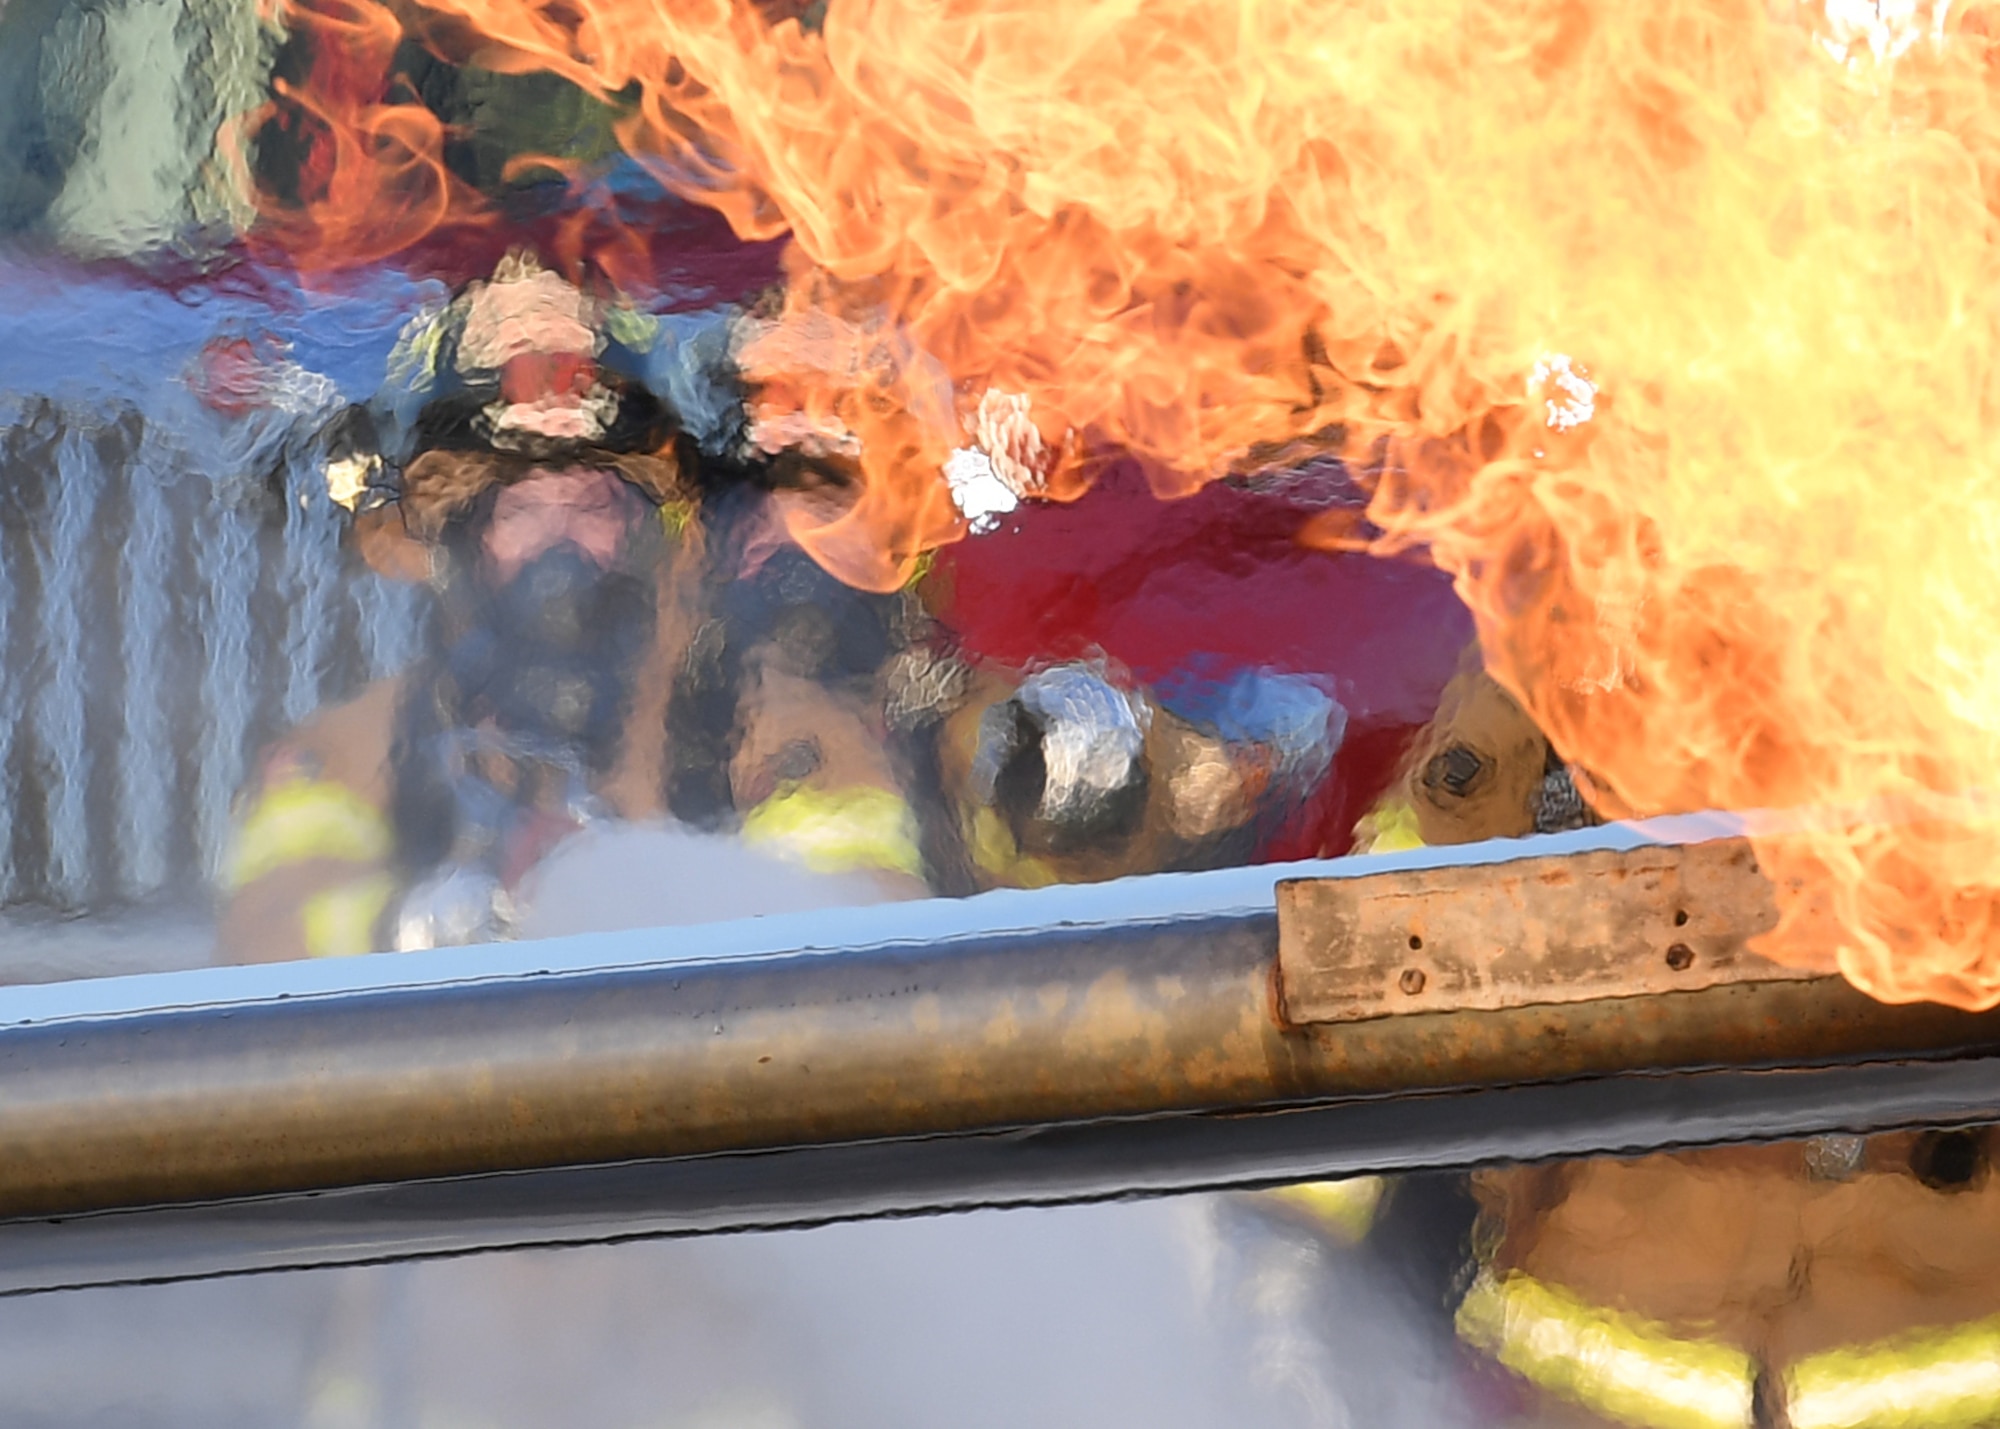 Keesler firefighters use a hand-held hose to extinguish a fire on a mock C-123 training device during an aircraft rescue fire fighting training on Keesler Air Force Base, Mississippi, June 4, 2019. The joint agency training allowed the Keesler Fire Department, Gulfport Combat Readiness Training Center Fire Department, Stennis Airport Fire Department and the U.S. Naval Air Station Pensacola Gulf Coast Fire Rescue to meet the semi-annual training requirement to practice aircraft rescue and live fire training evolutions. (U.S. Air Force photo by Kemberly Groue)